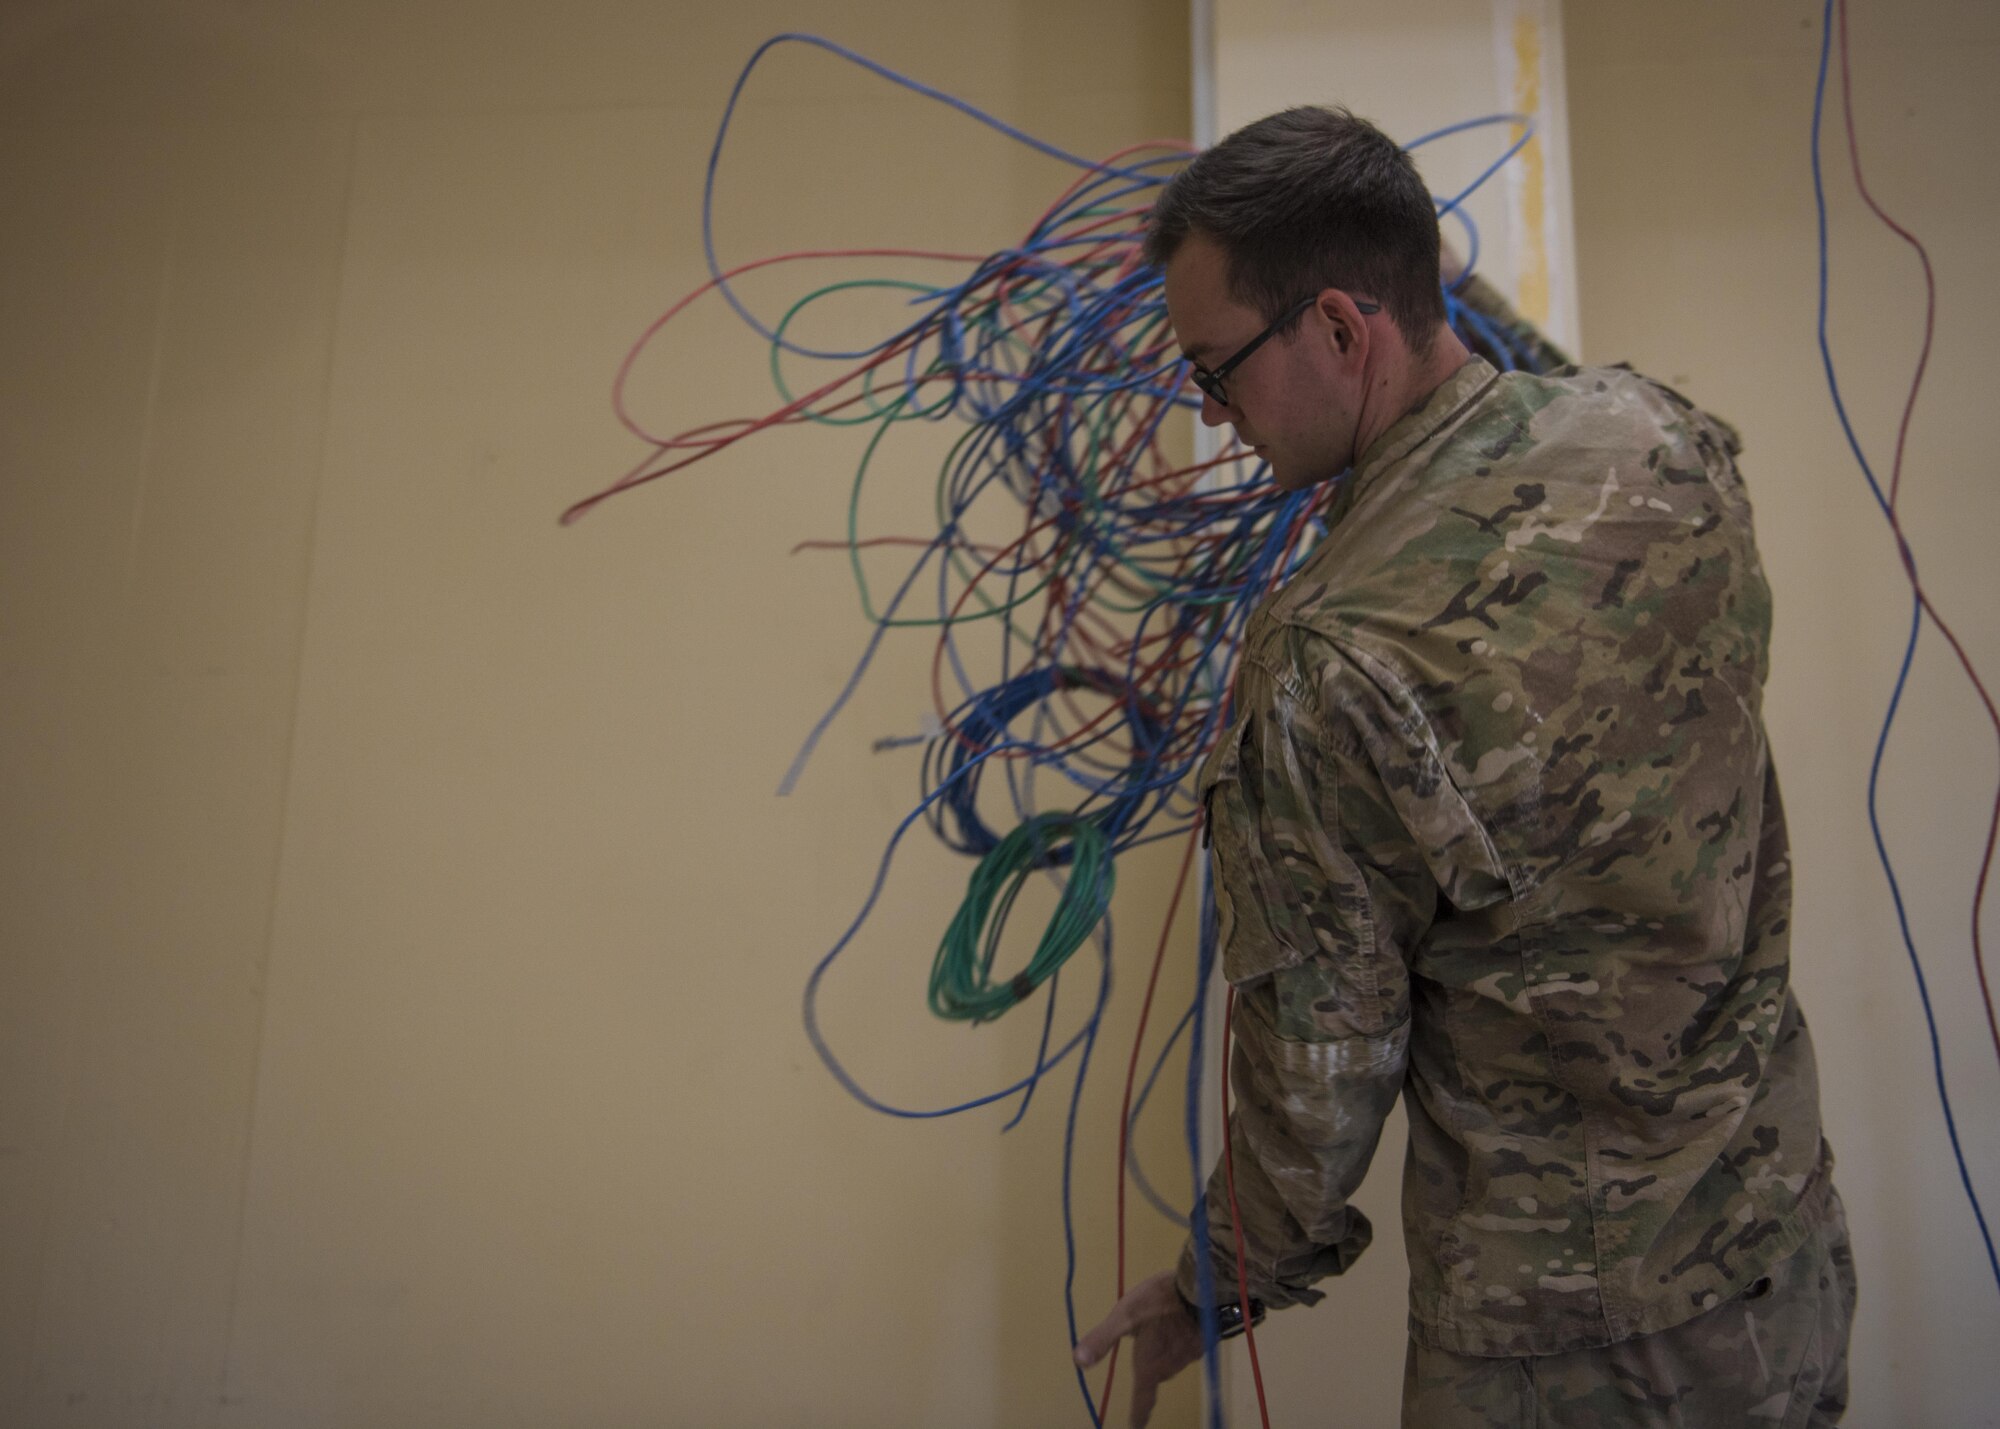 Senior Airman John Roach, 455th Expeditionary Communications Squadron, cable and antenna maintenance journeyman, gathers old cables together, Bagram Airfield, Afghanistan, Sept. 20, 2016. The cable team ensures that all cable and wireless systems are installed and maintained and provide command and control (C2) capabilities throughout the base. (U.S. Air Force photo by Senior Airman Justyn M. Freeman)